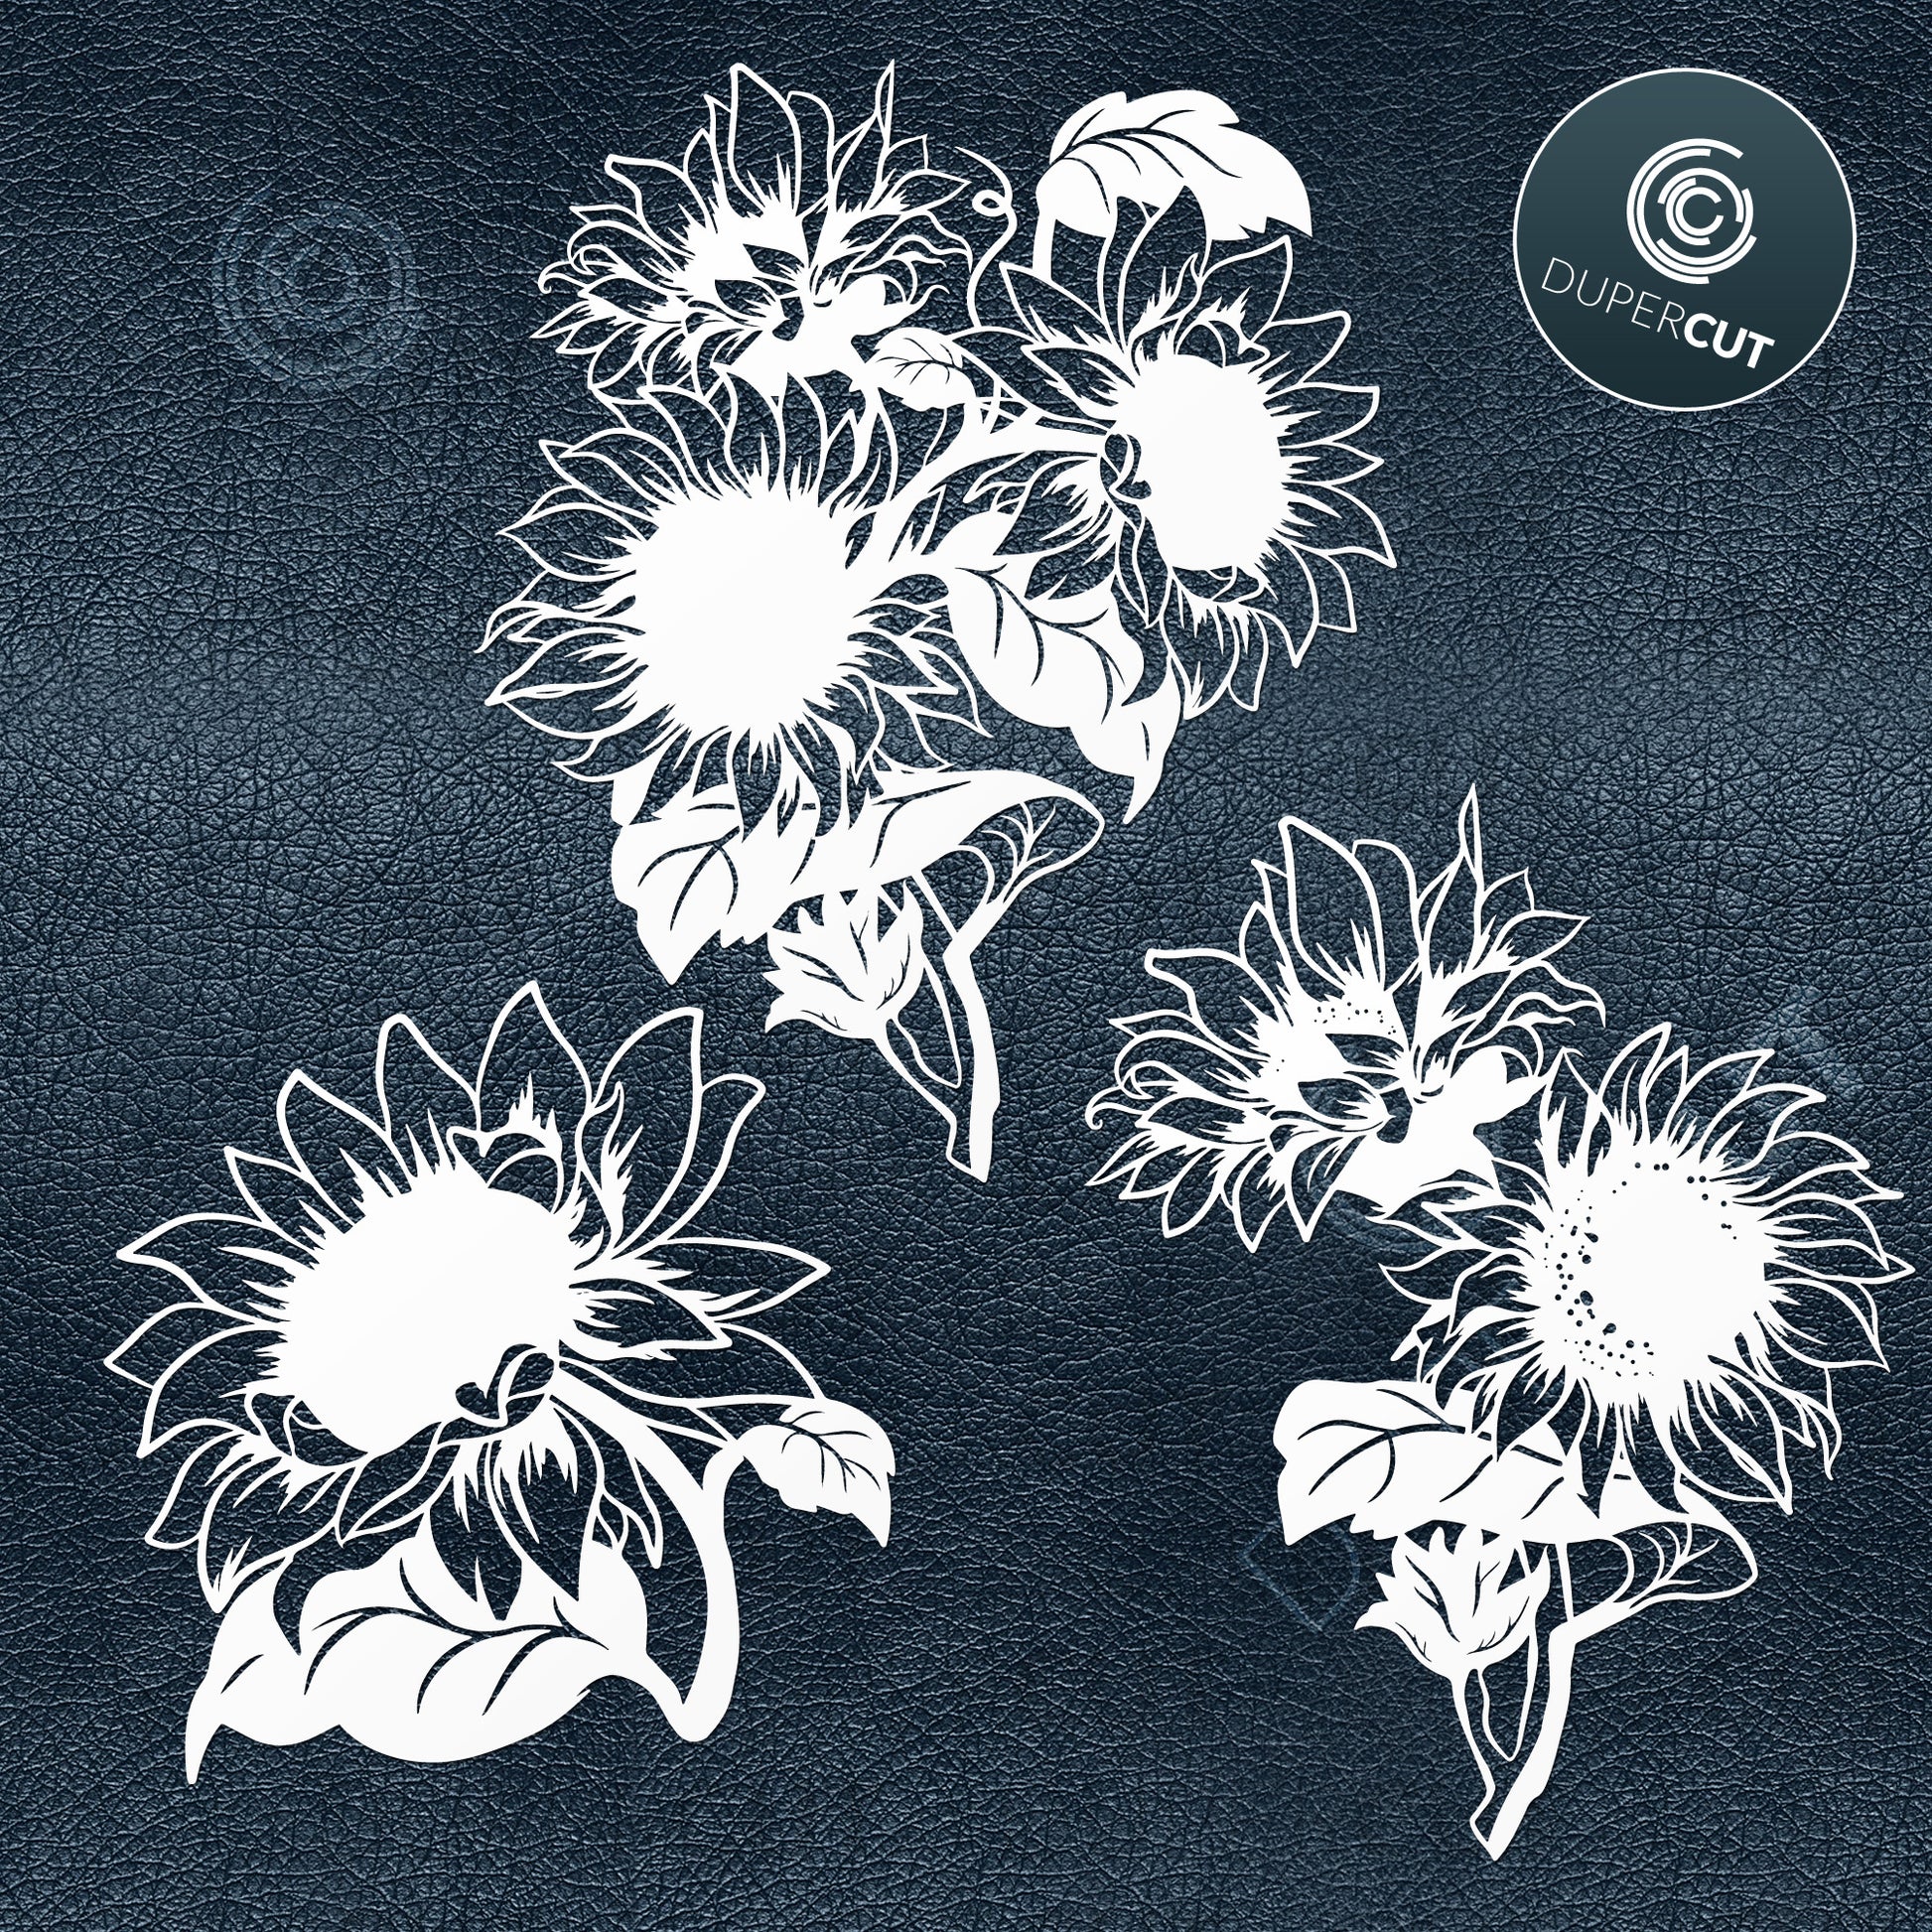 Sunflower line art illustration, paper cutting  template - SVG DXF PNG files for Cricut, Glowforge, Silhouette Cameo, CNC Machines